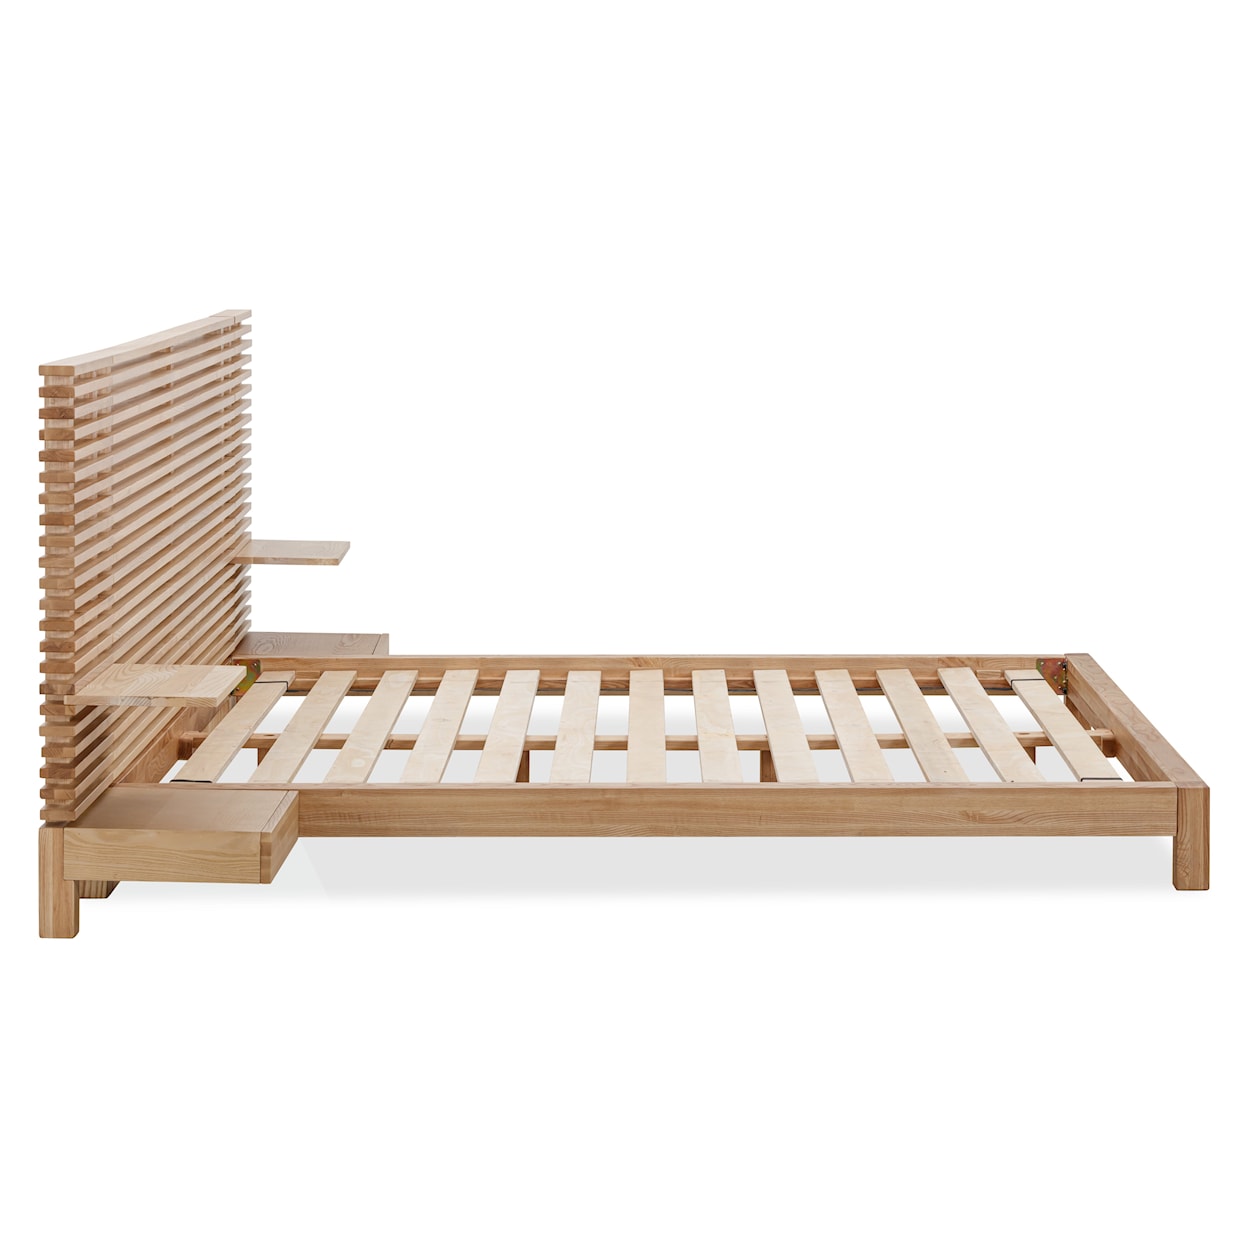 Modus International Tanner King Wall Bed